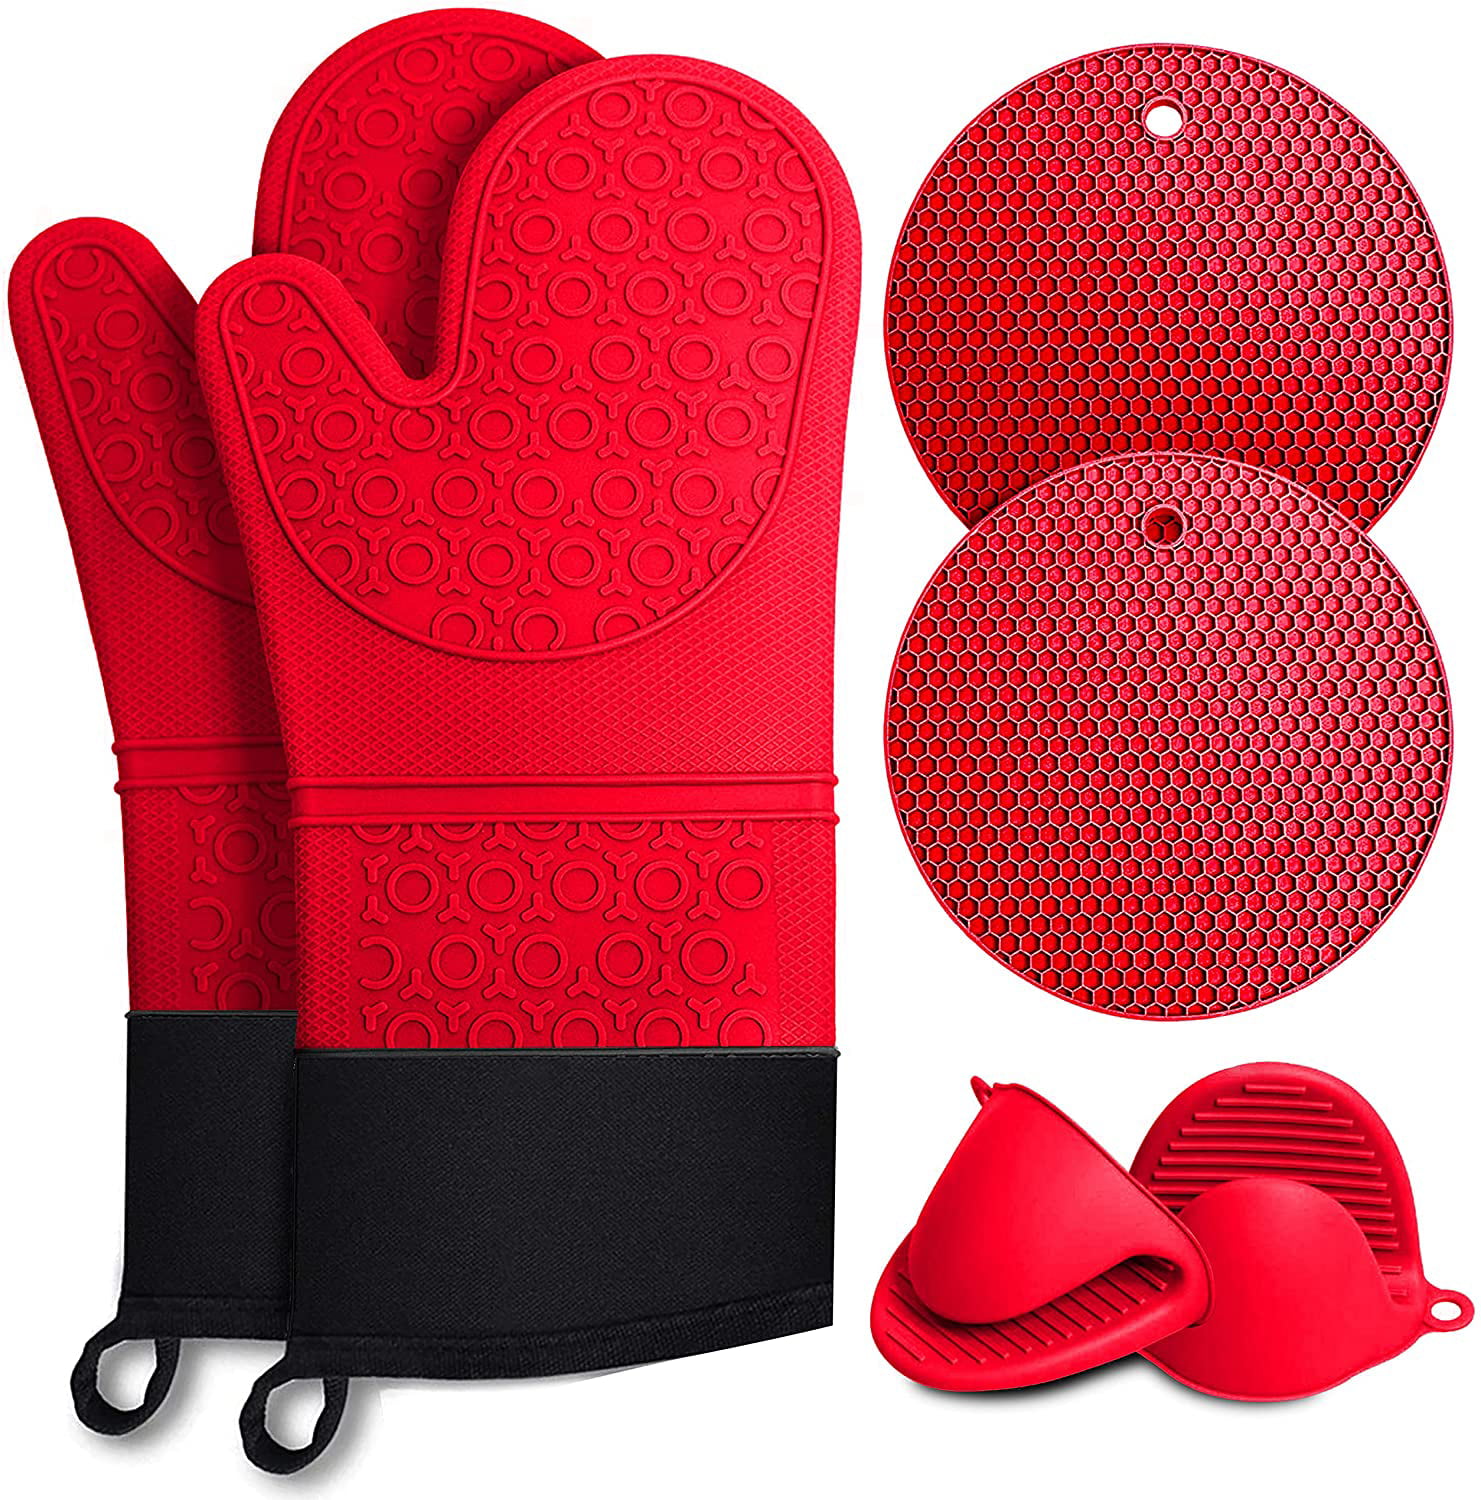 Details about   1 Pair Oven Gloves Heat Resistant Mitts Potholders Pad for Cooking Baking 